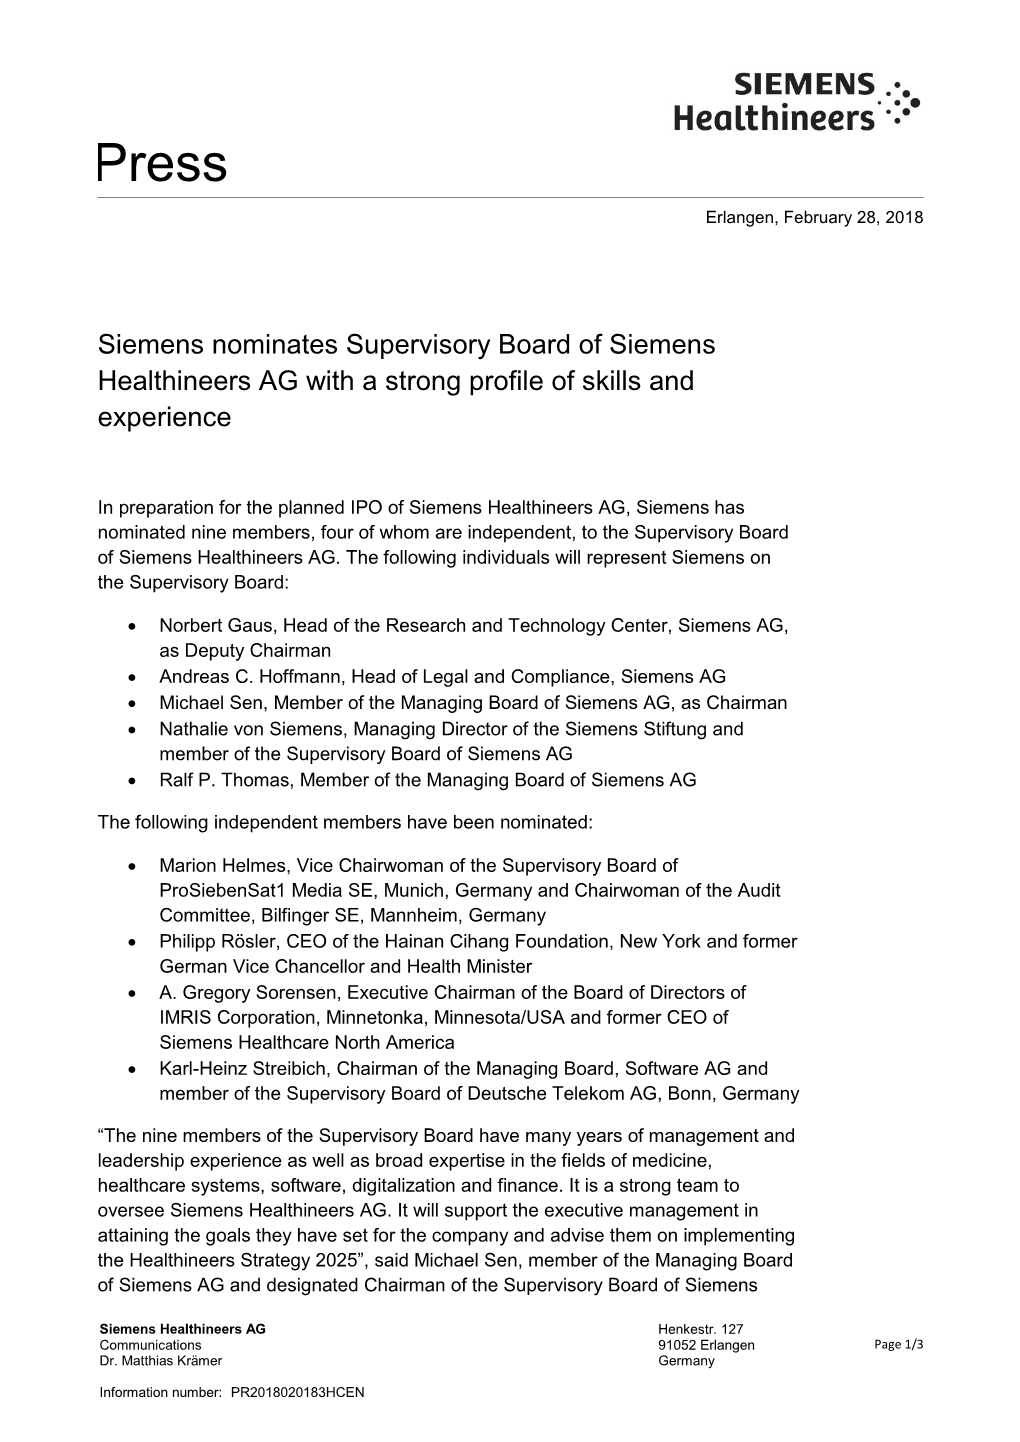 Siemens Nominates Supervisory Board of Siemens Healthineers AG with a Strong Profile of Skills and Experience